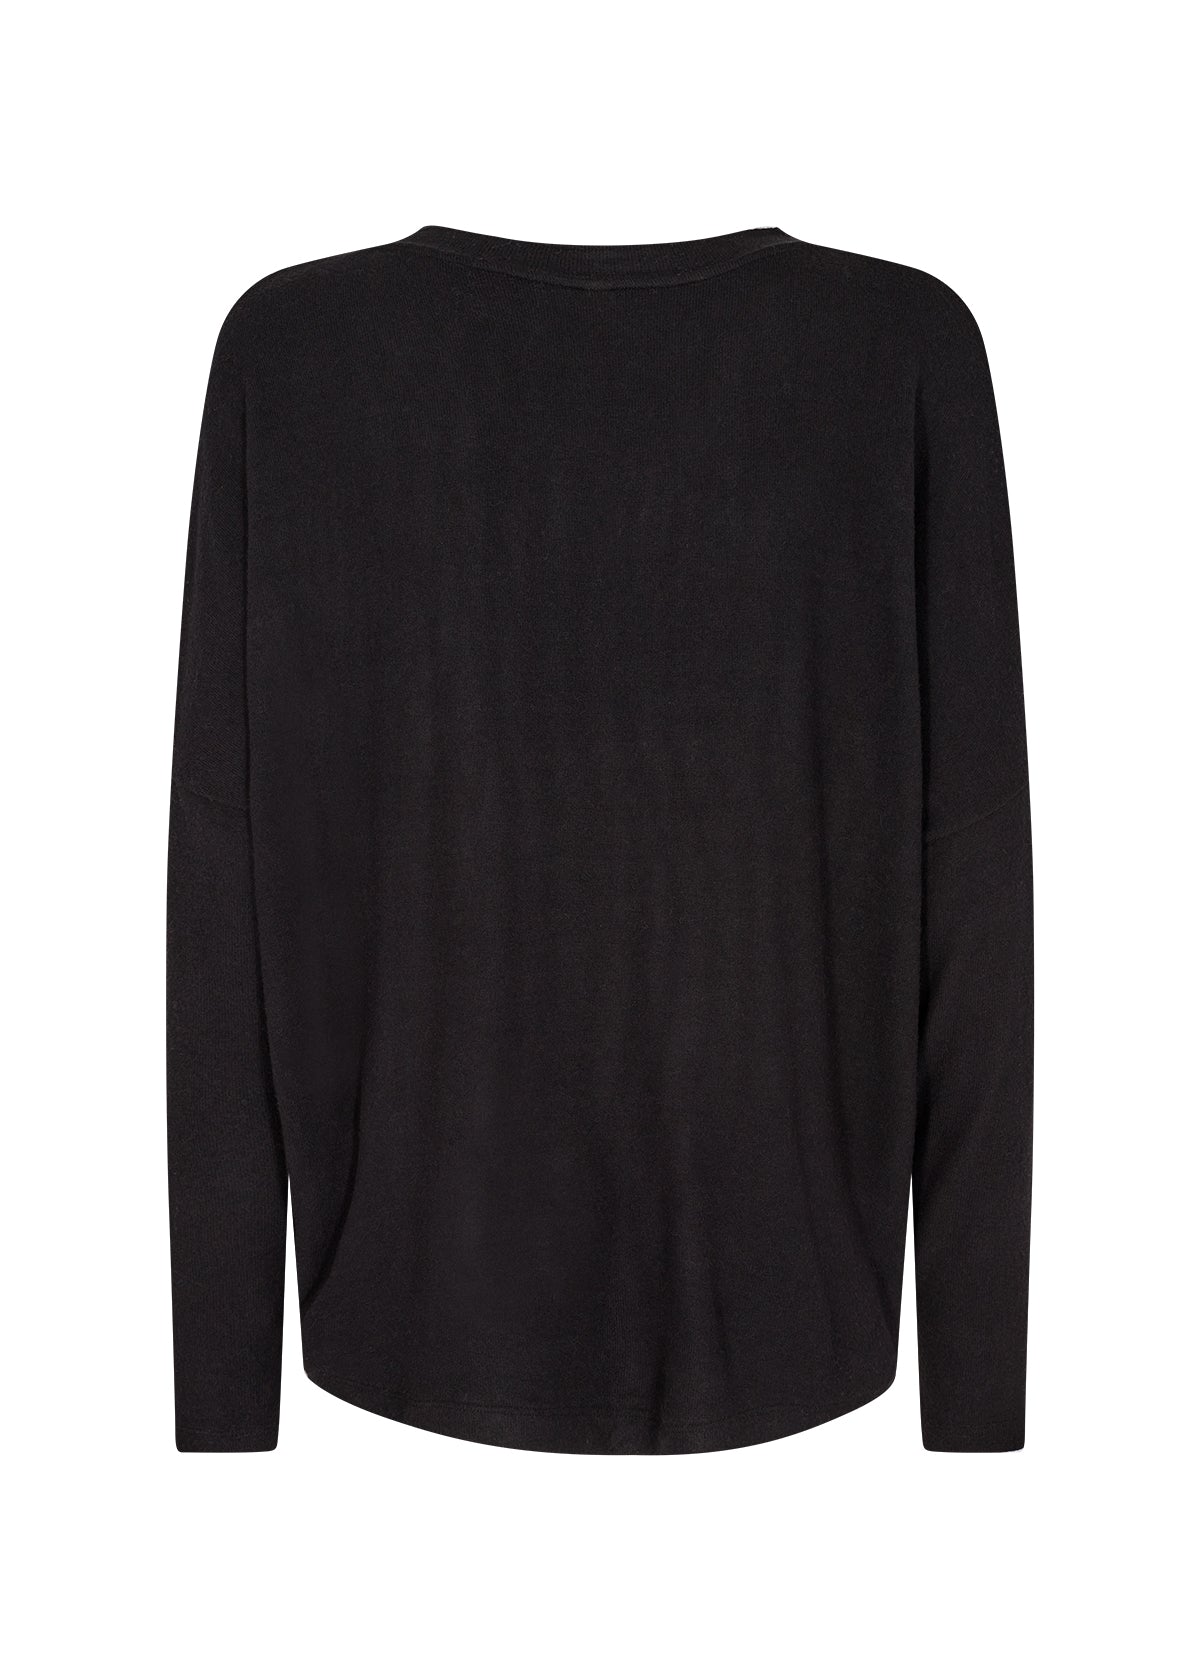 The Helena Top in Black